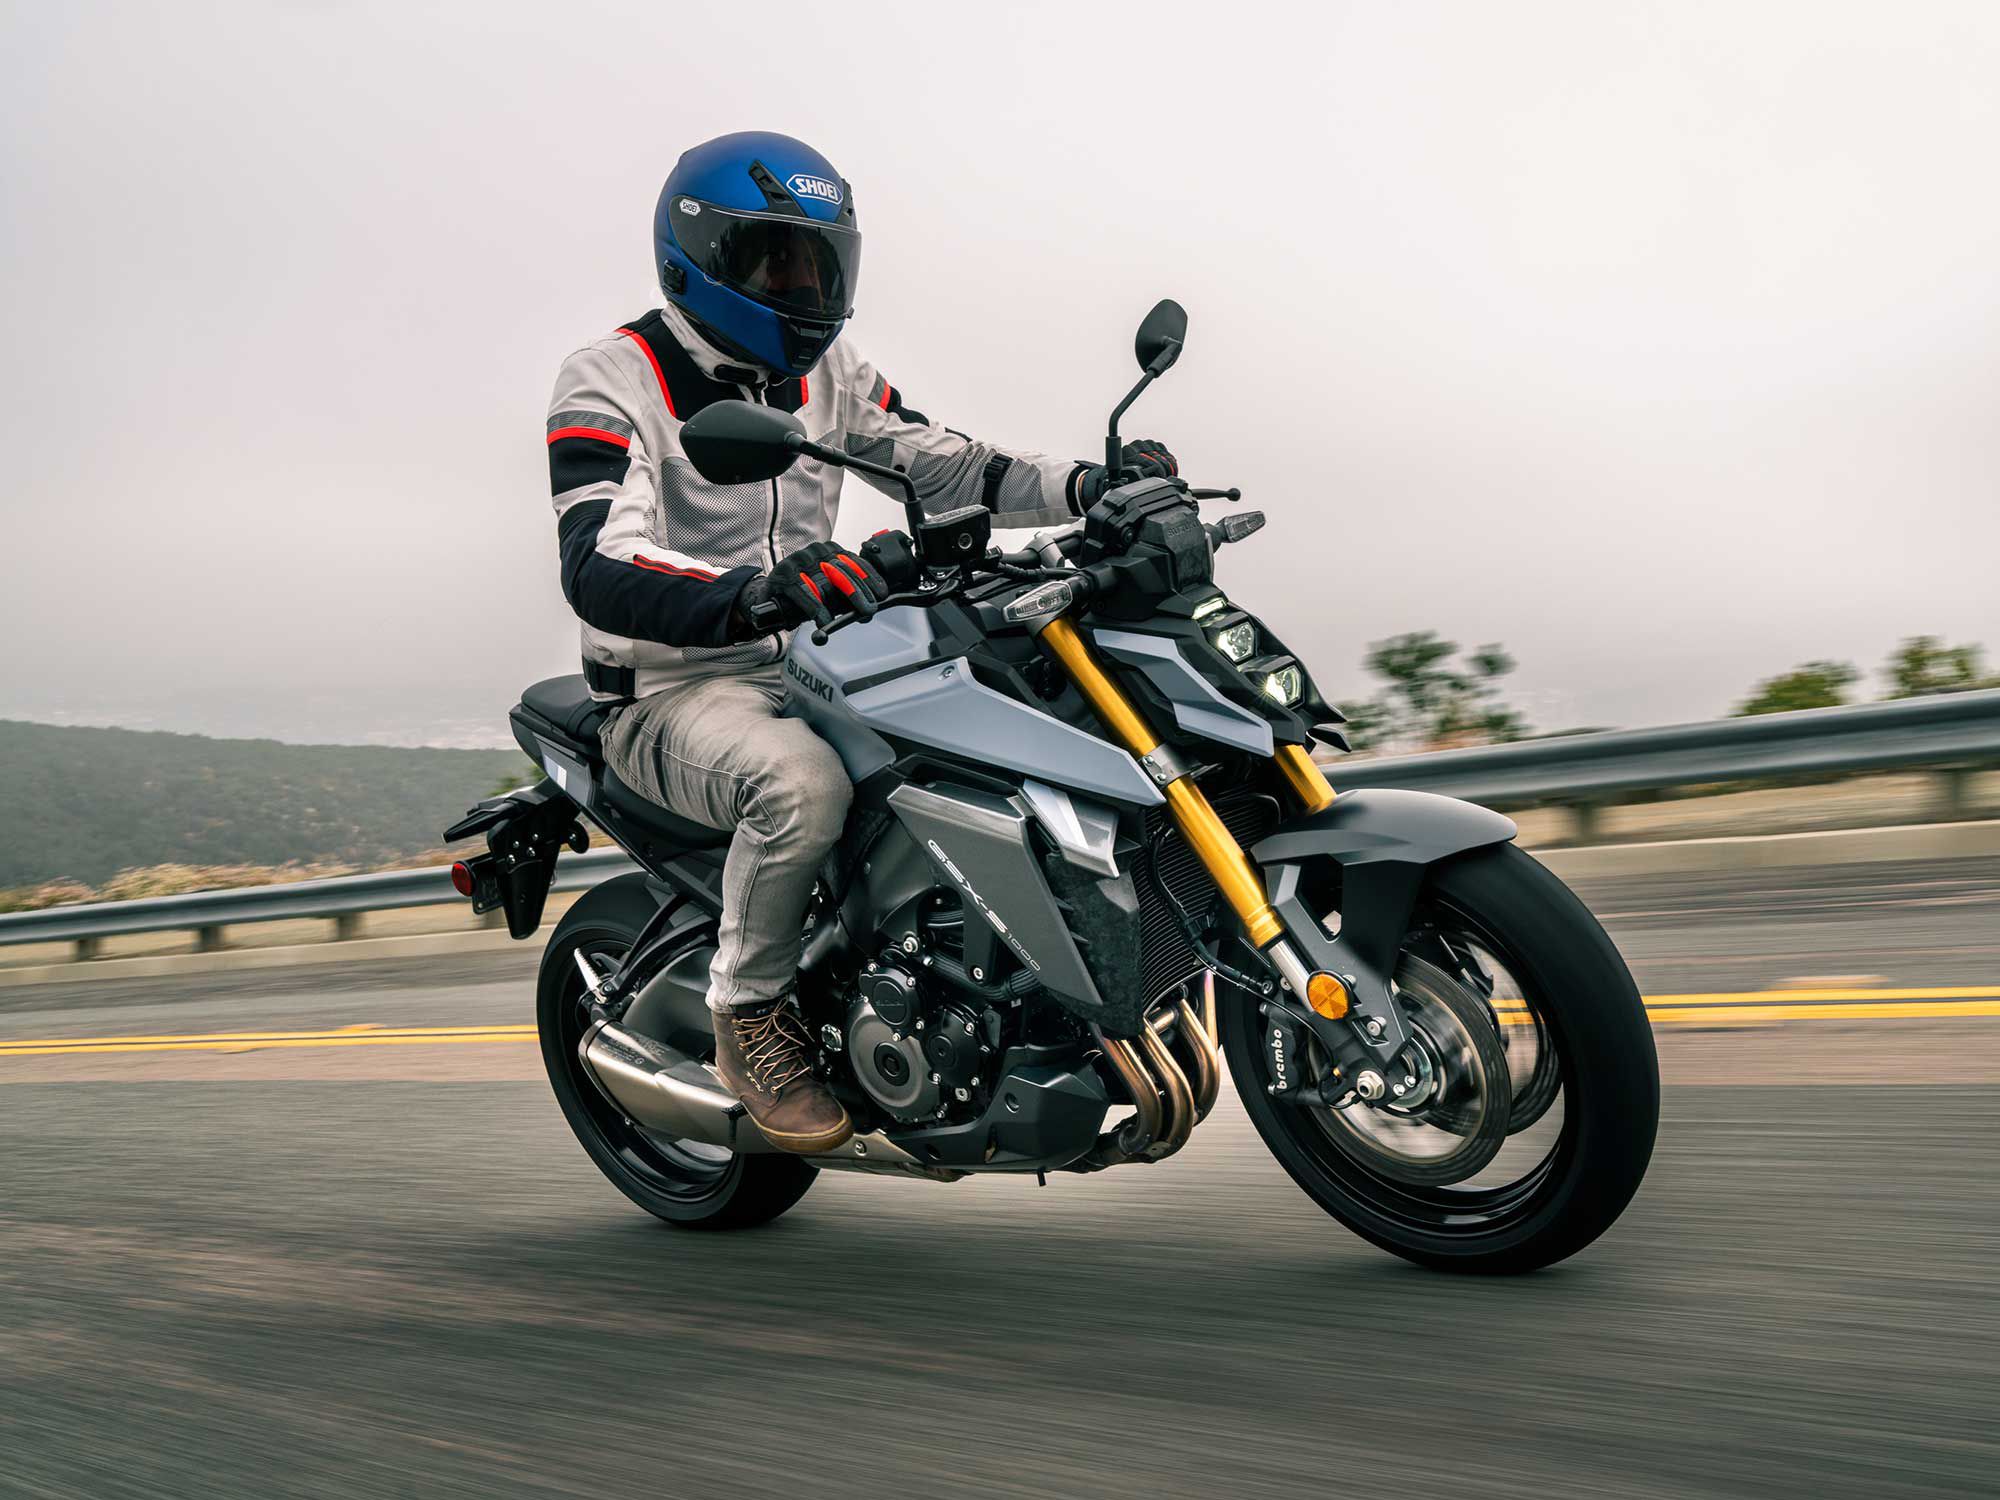 We try out Suzuki’s affordable 2022 GSX-S1000 naked bike.